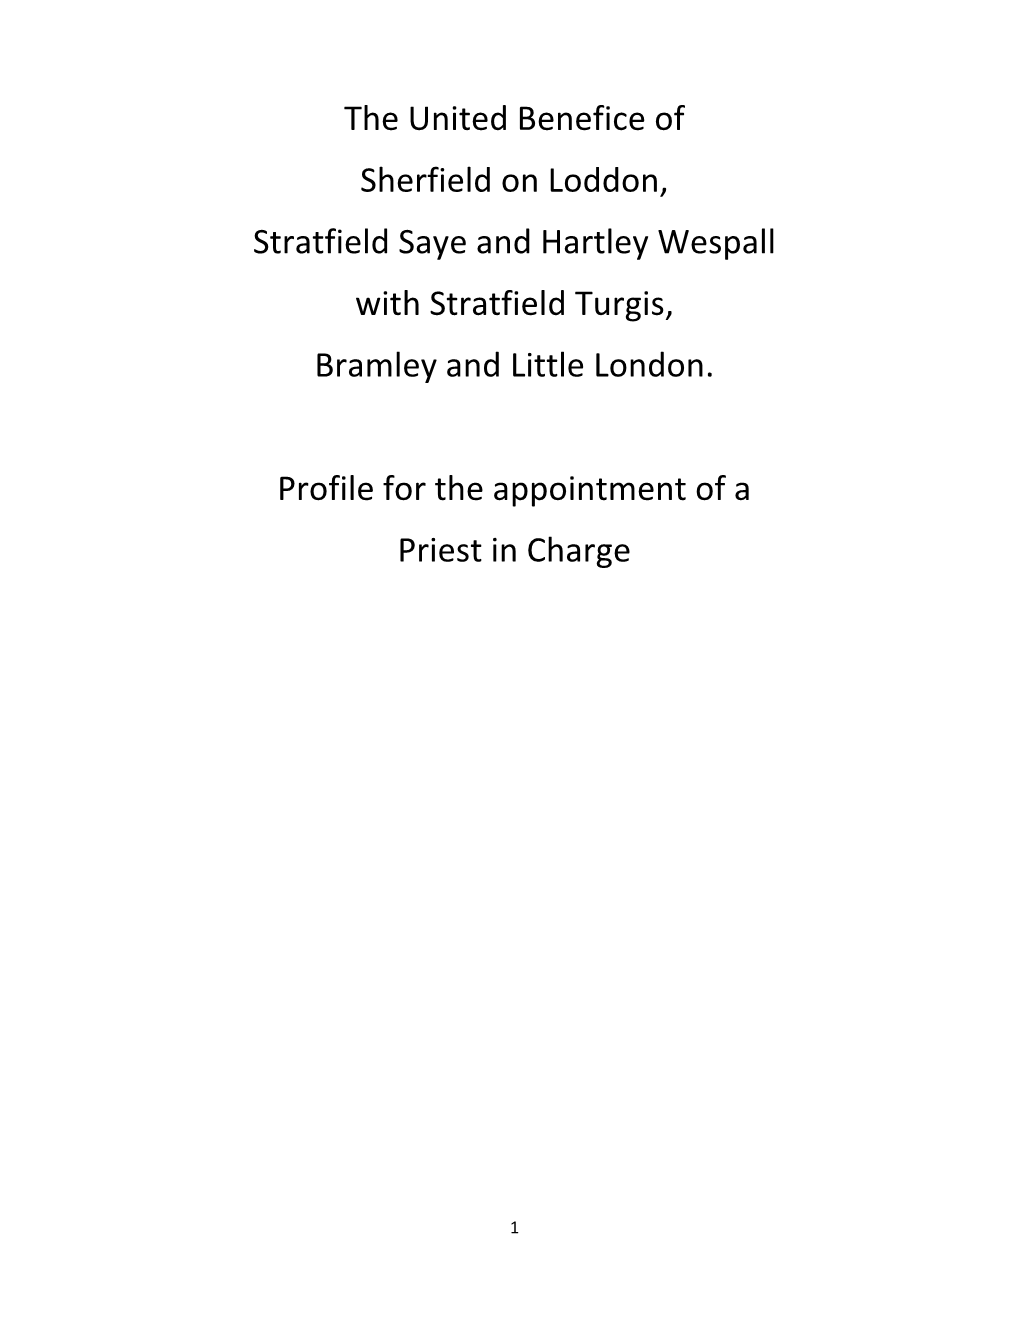 The United Benefice of Sherfield on Loddon, Stratfield Saye and Hartley Wespall with Stratfield Turgis, Bramley and Little London